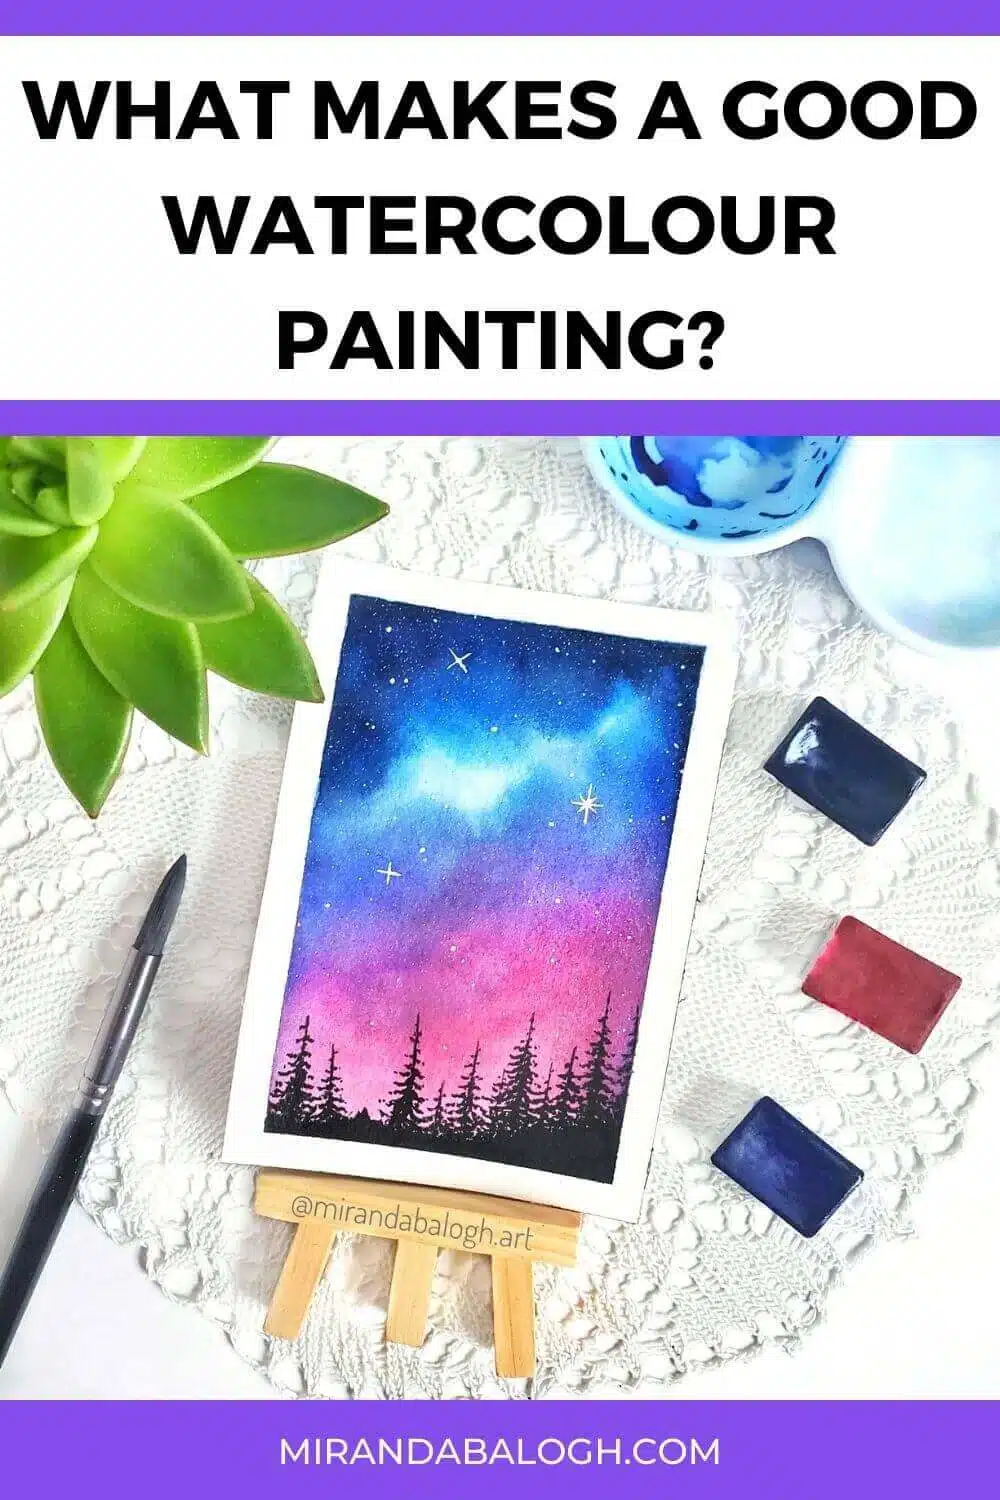 What is a good watercolour painting? A good watercolour painting is vibrant, luminous, and transparent. To create beautiful watercolour artwork, you should use professional watercolour paints that have high lightfastness, transparency, and pure pigments. So, use this guide to help you choose the best watercolour supplies for beginners, including the best paints, brushes, and paper.